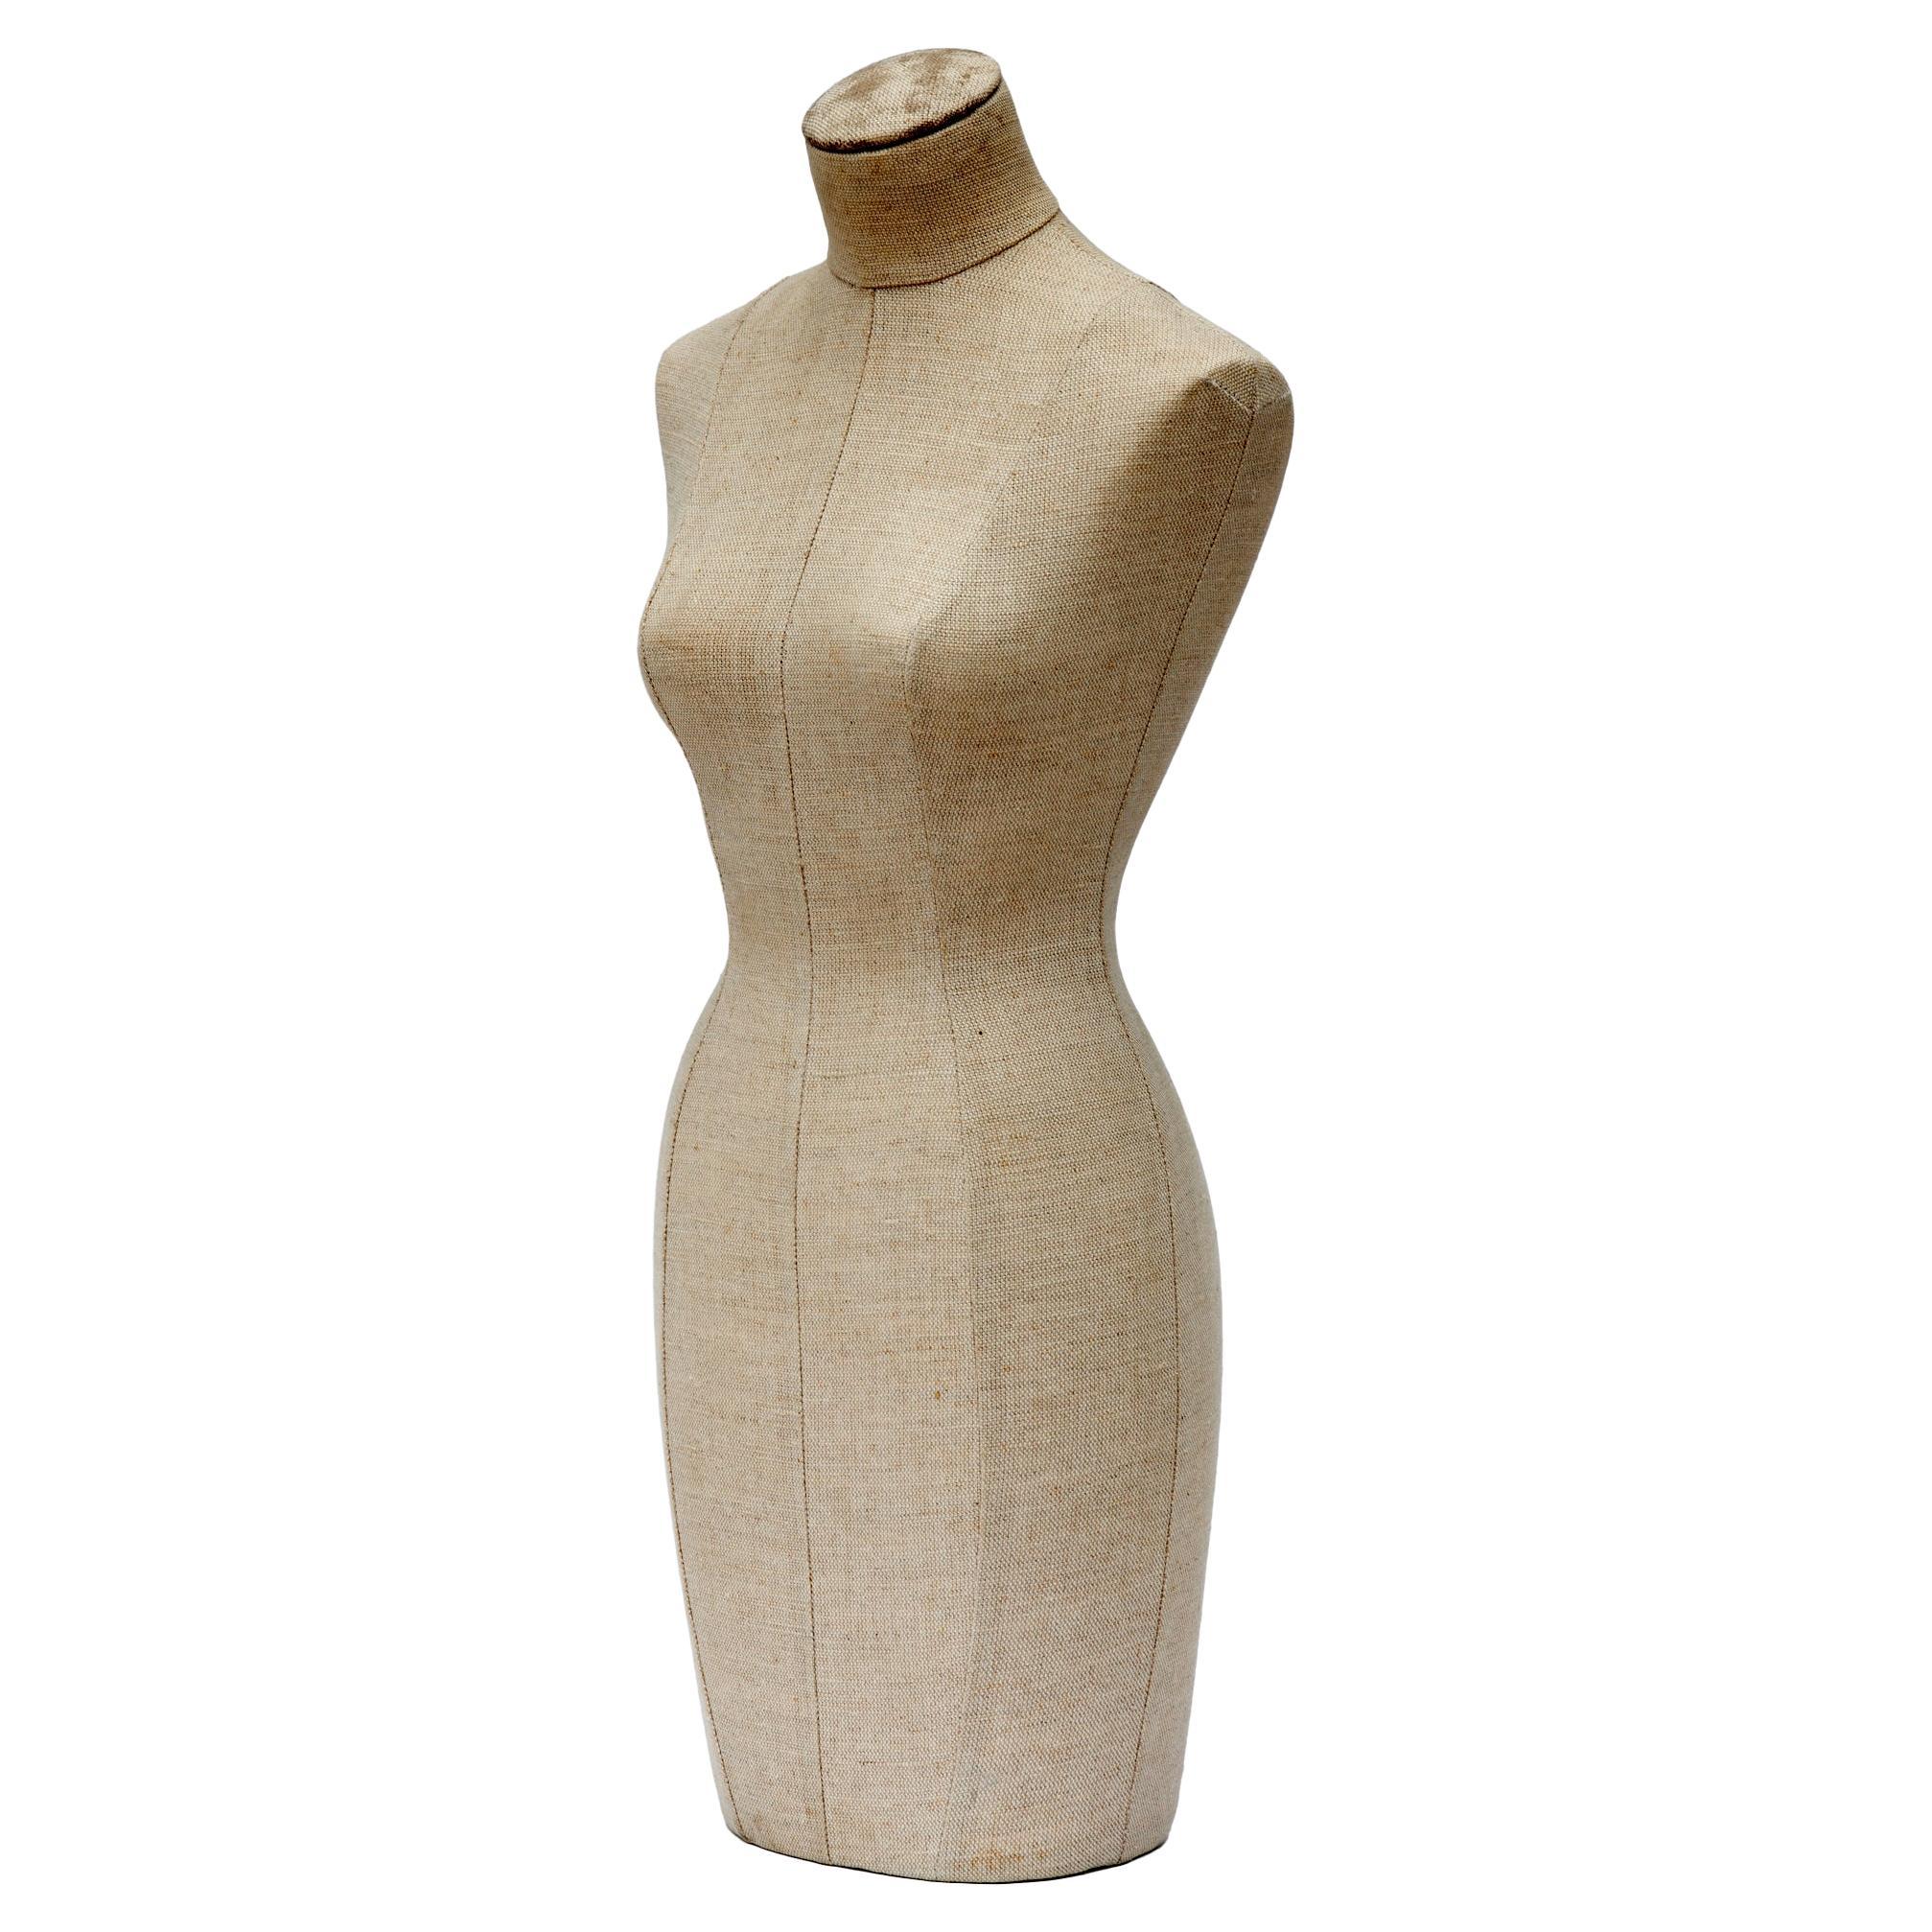 Designer's jewelry mannequin wrapped in Belgian linen over hardwood. Interior mechanism to place on a stand.